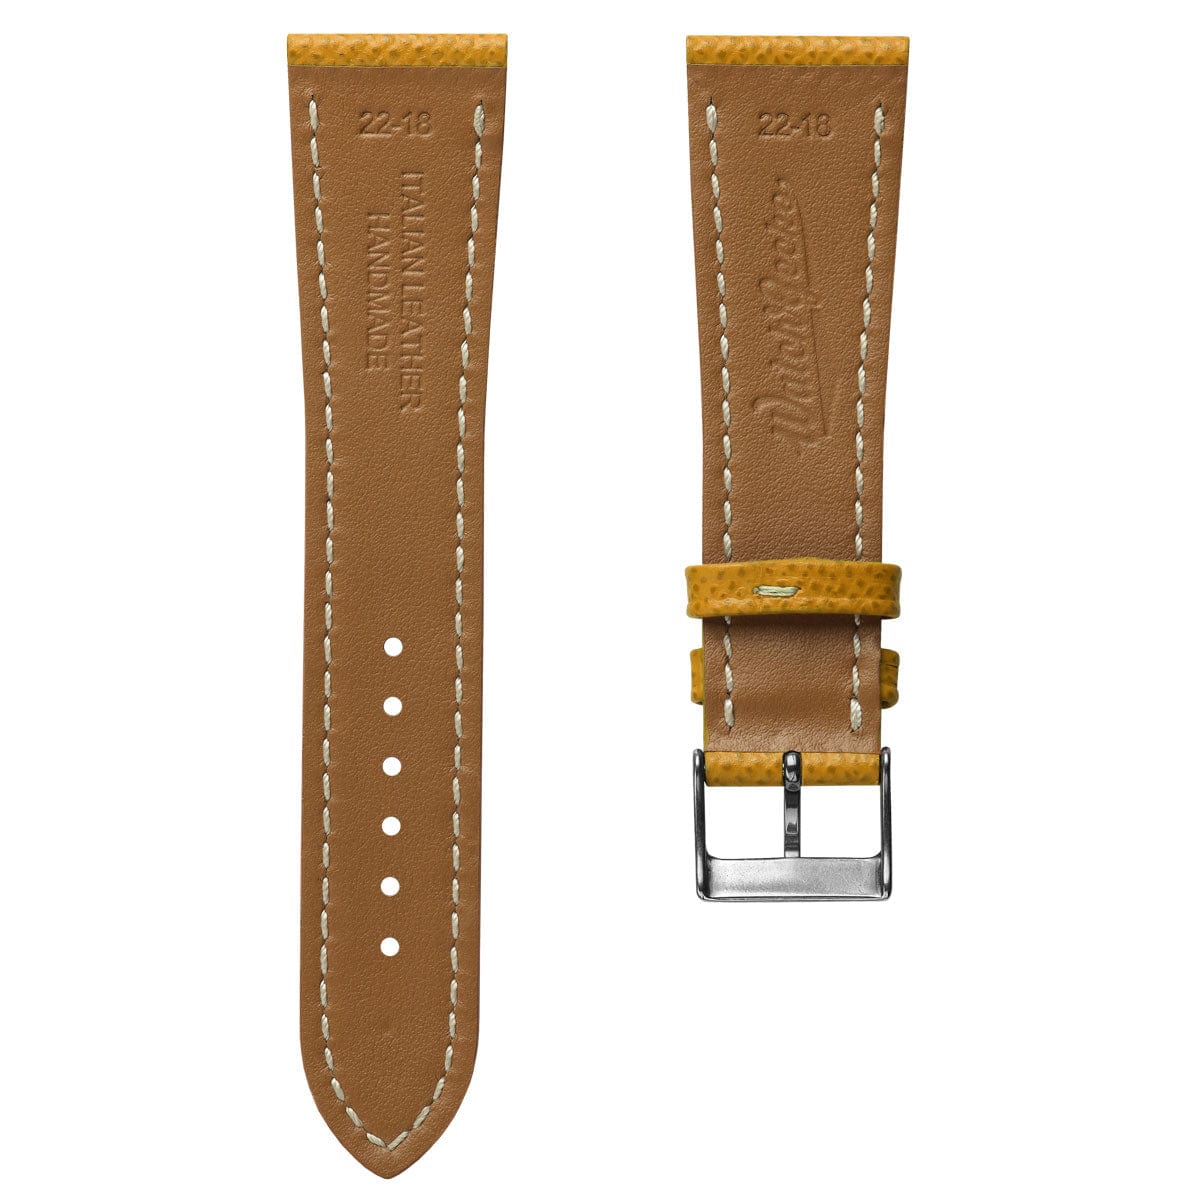 Sestriere Hand Stitched Italian Leather Watch Strap  - Alpine Yellow